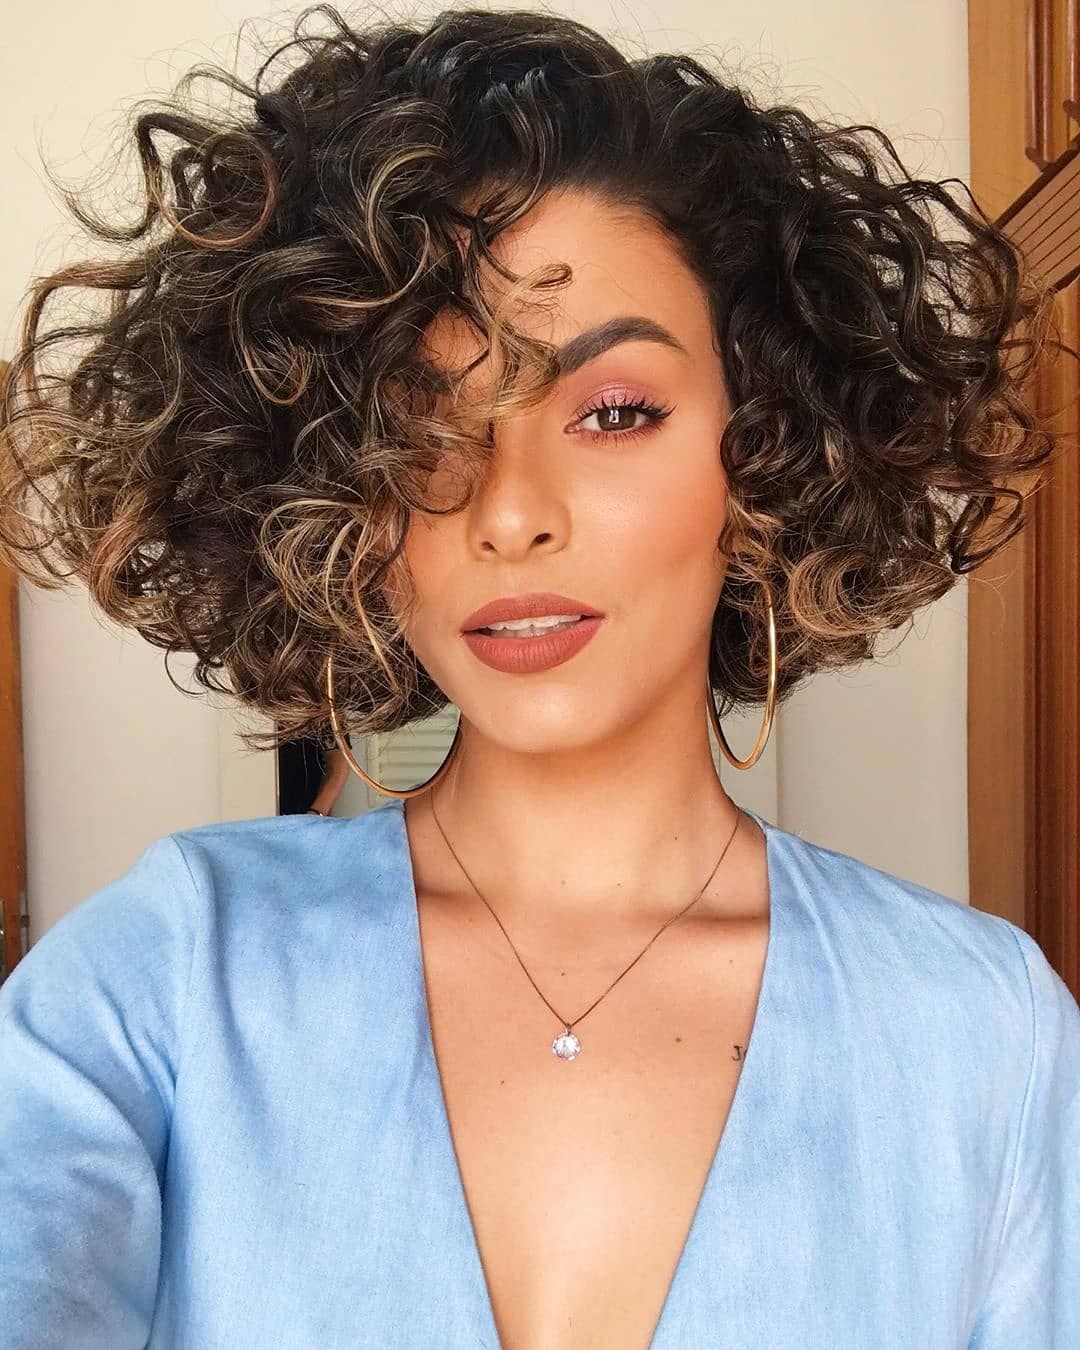 Summer 2023 Hair Trends: Short Curly Hairstyles for Women, From Beach Waves to Brunette Highlights